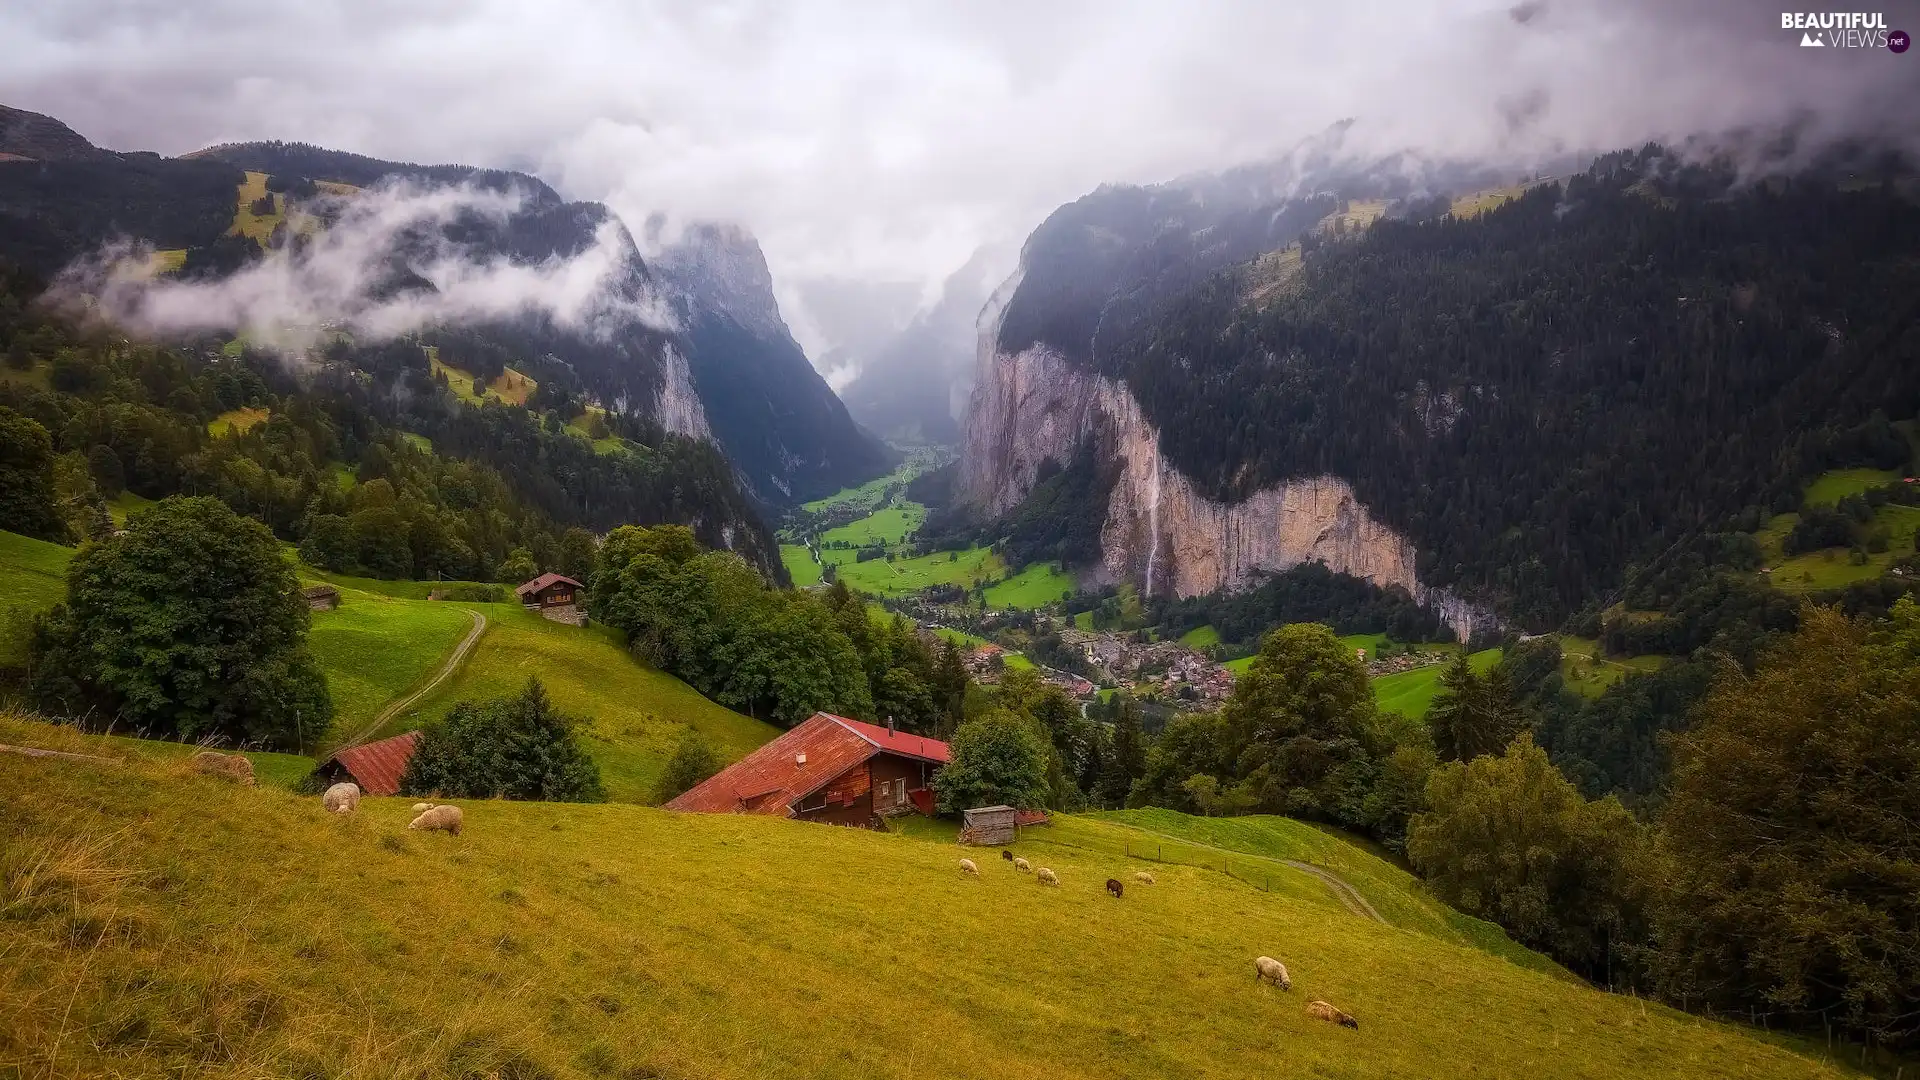 Meadow, Mountains, Lauterbrunnental Valley, viewes, Fog, Switzerland, Alps, Sheep, trees, Houses